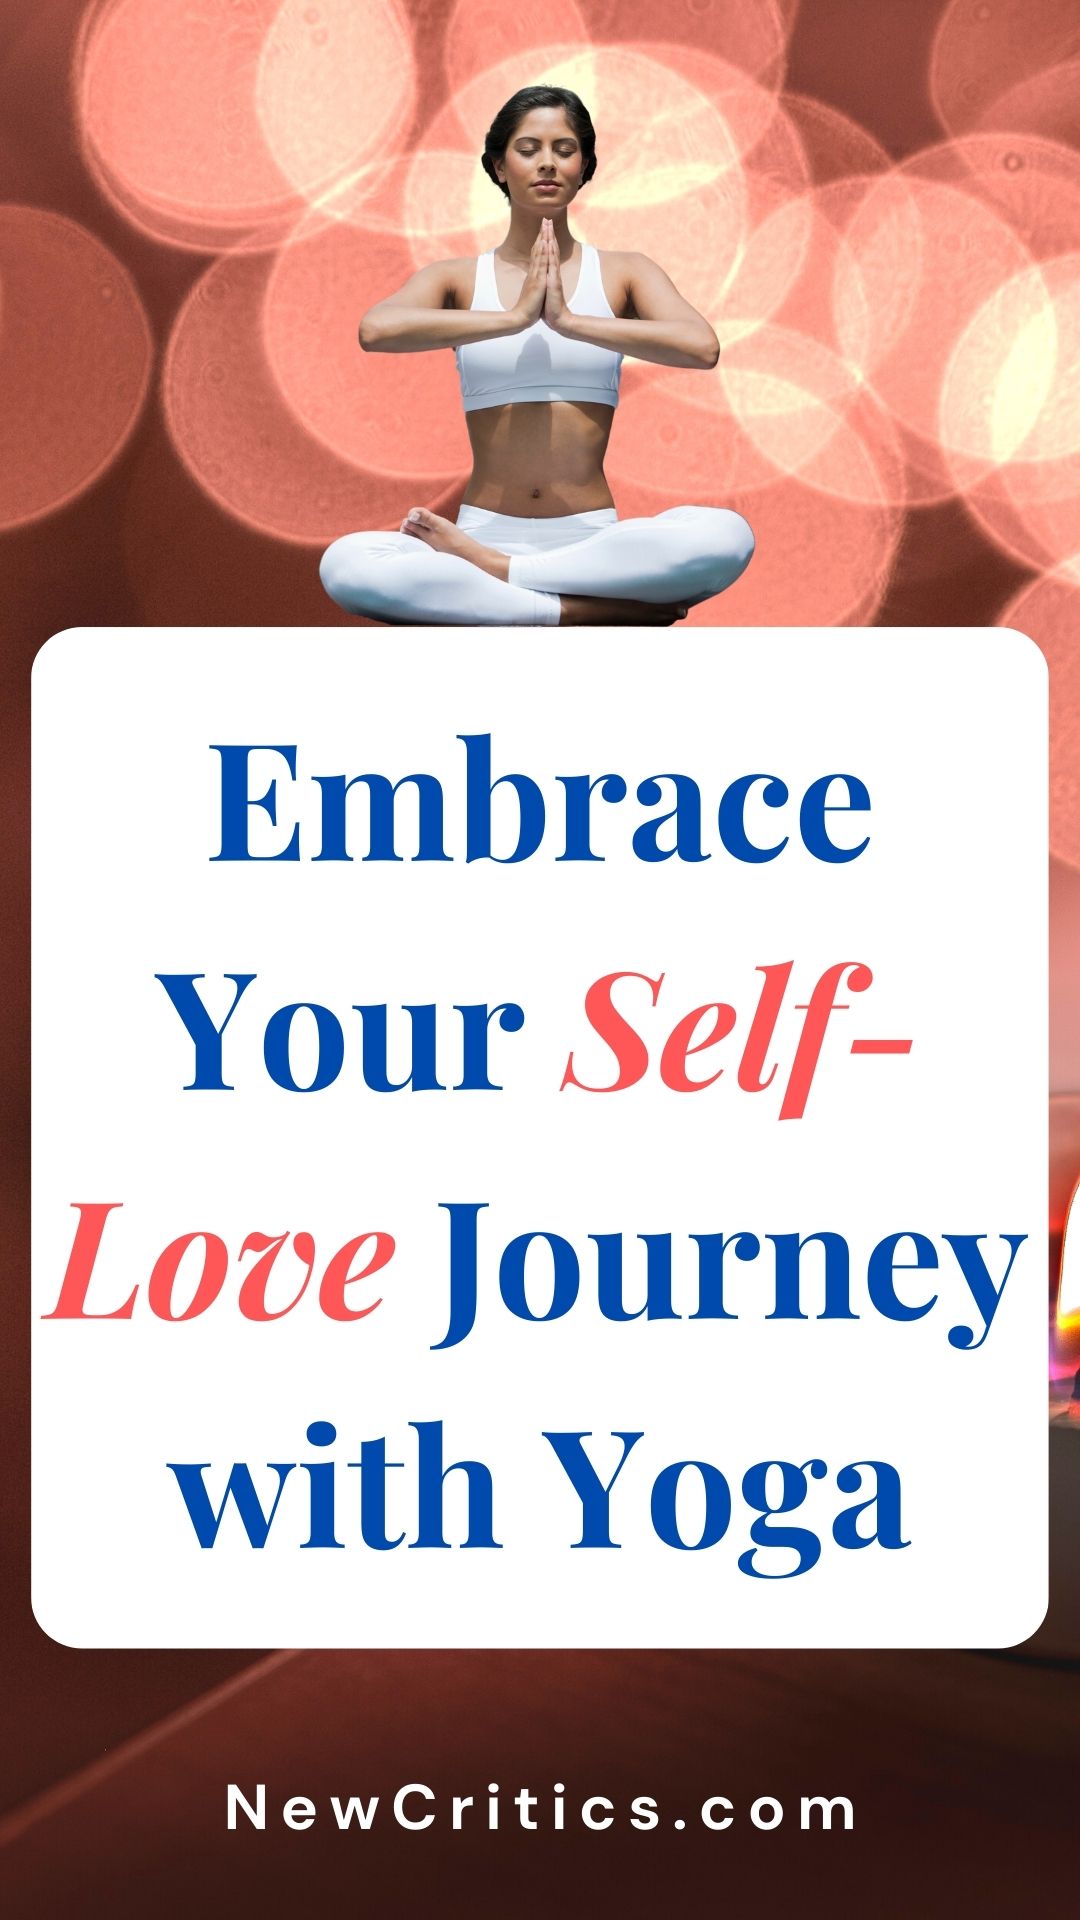 Embrace Your Self-Love Journey with Yoga / Canva